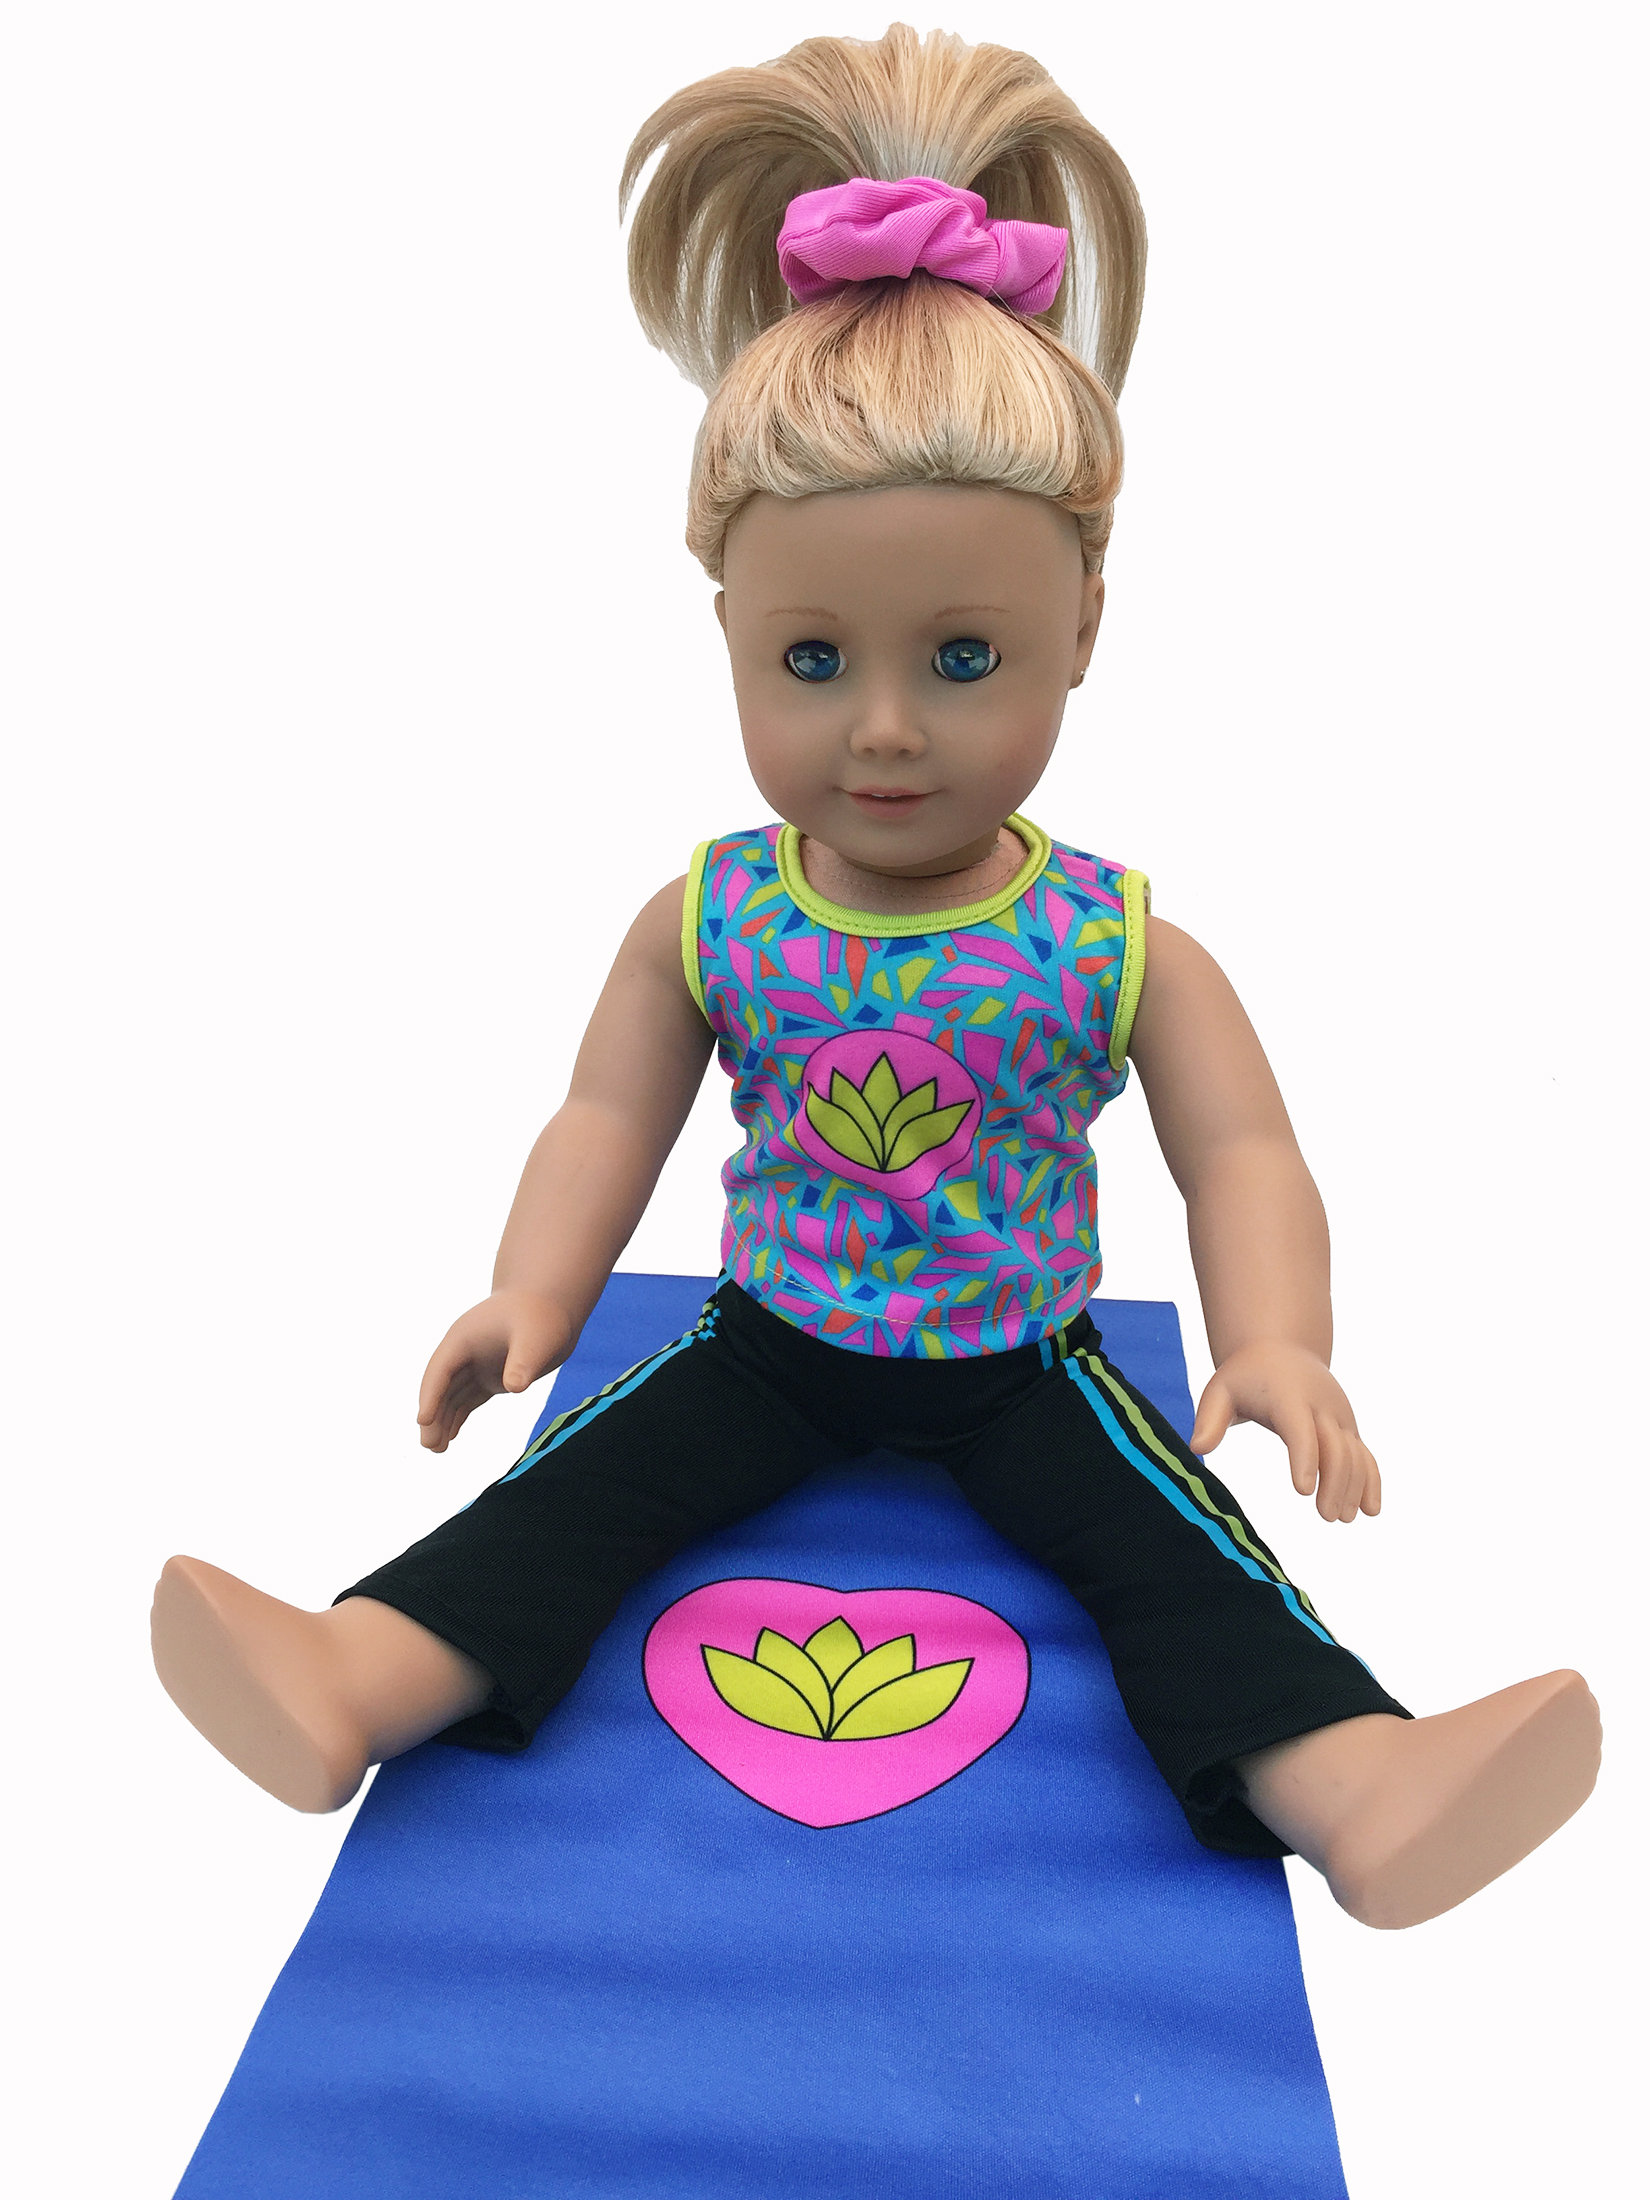 Our Generation Yoga Outfit Playset Fits Most 18 Dolls, OMMM MY WAY